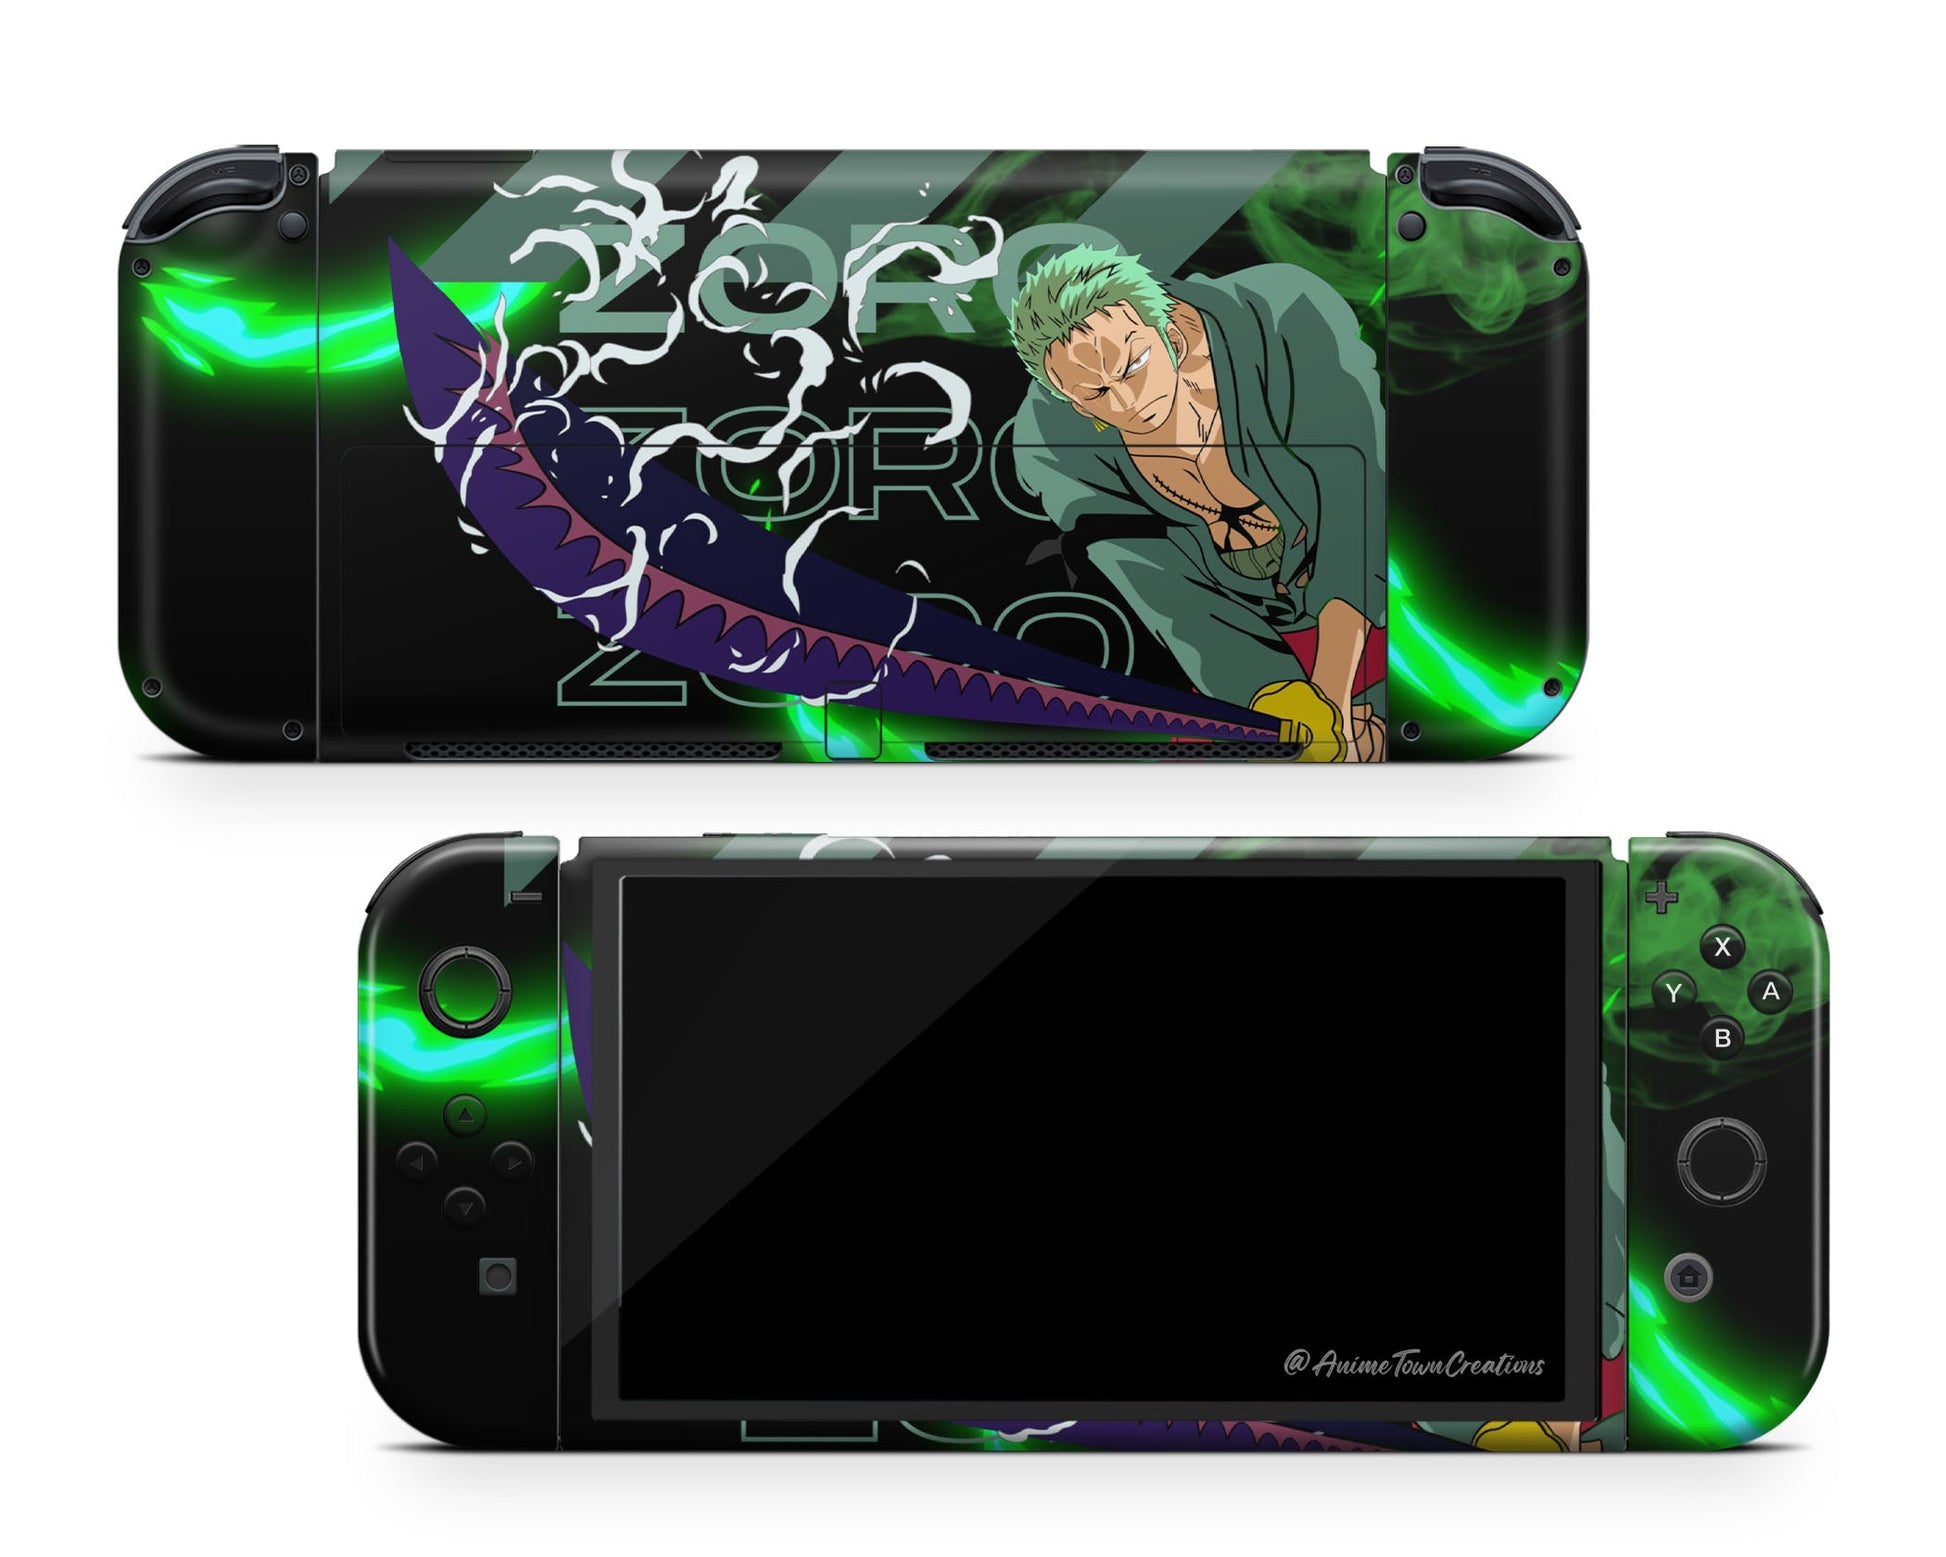 Anime Town Creations Nintendo Switch OLED One Piece Zoro Vinyl only Skins - Anime One Piece Switch OLED Skin